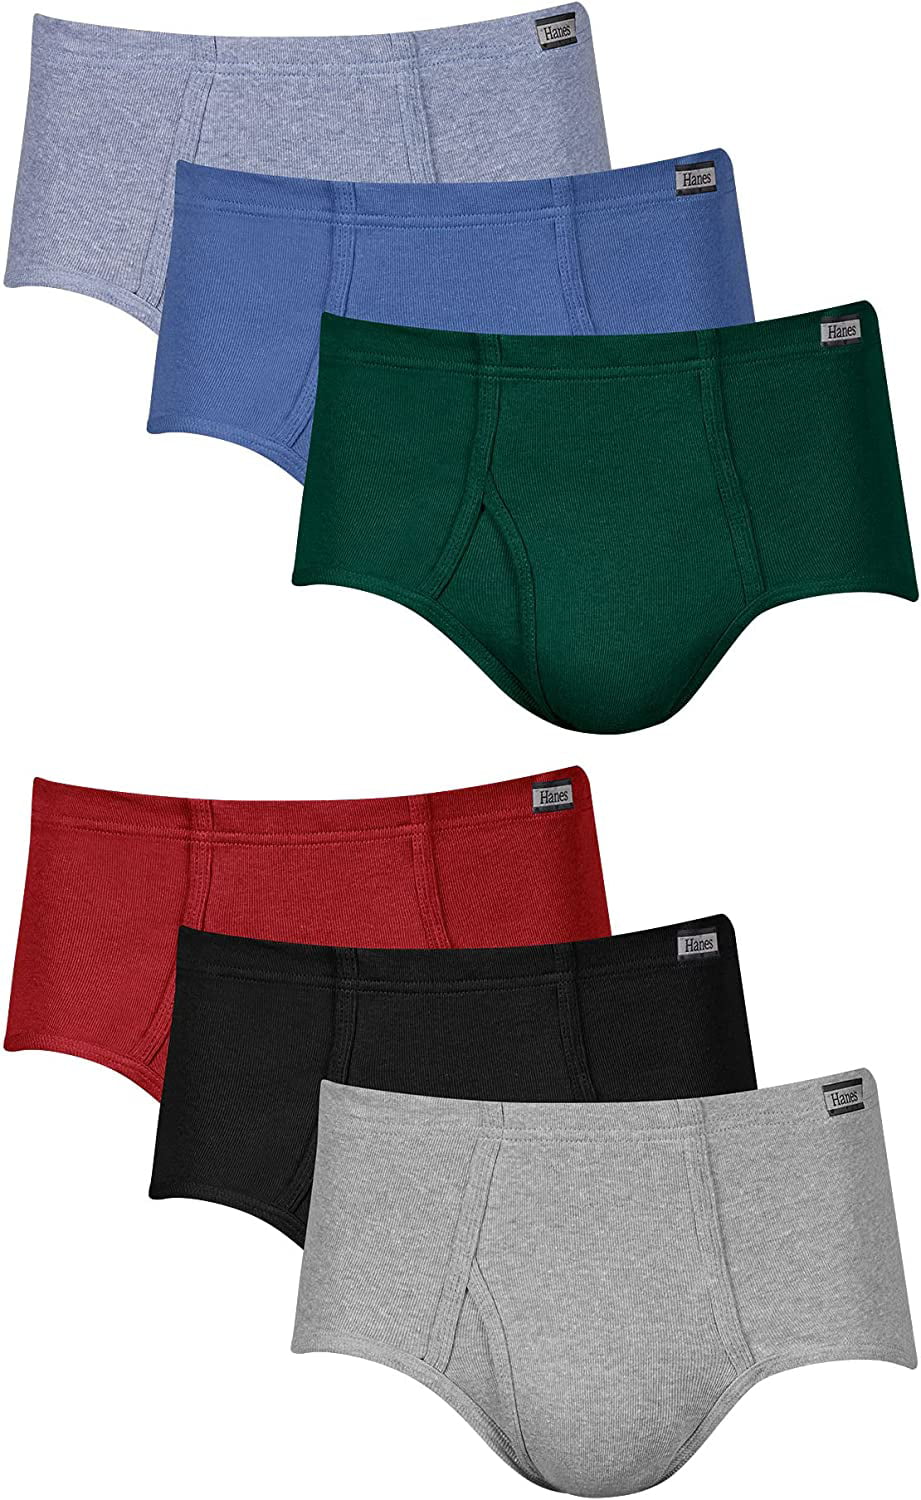 Hanes Men's Tagless® No Ride Up Briefs with Comfort Soft® Waistband 6 Pack